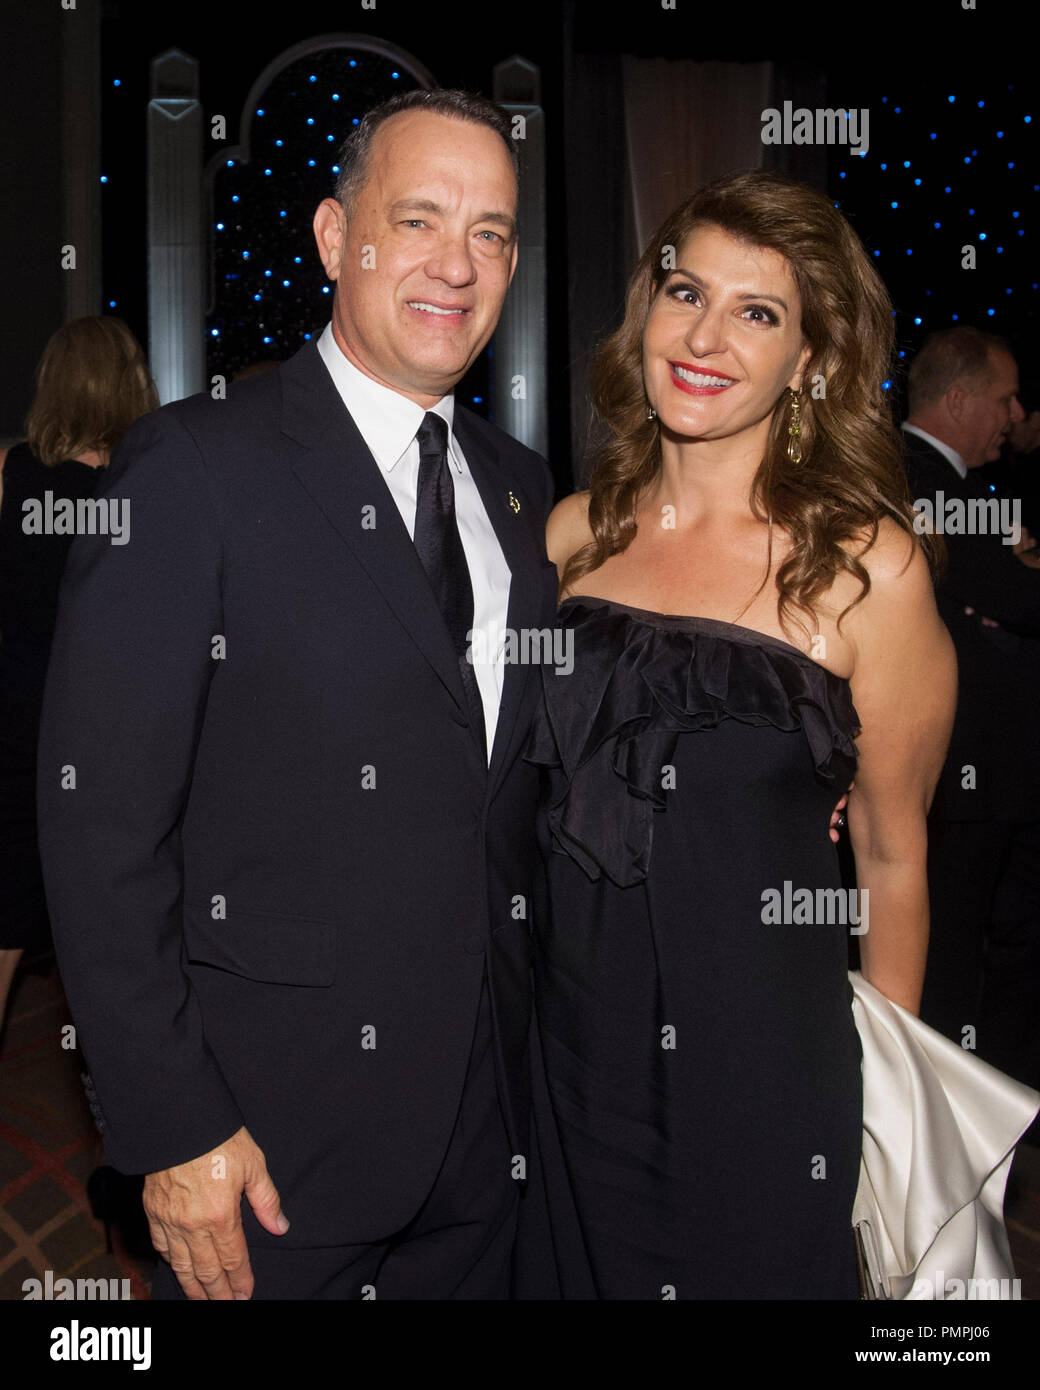 Oscar®-winning actor Tom Hanks (left) and Oscar-nominated writer/actress Nia Vardalos attend the 2012 Governors Awards at The Ray Dolby Ballroom at Hollywood & Highland Center® in Hollywood, CA, Saturday, December 1.  File Reference # 31744 047  For Editorial Use Only -  All Rights Reserved Stock Photo